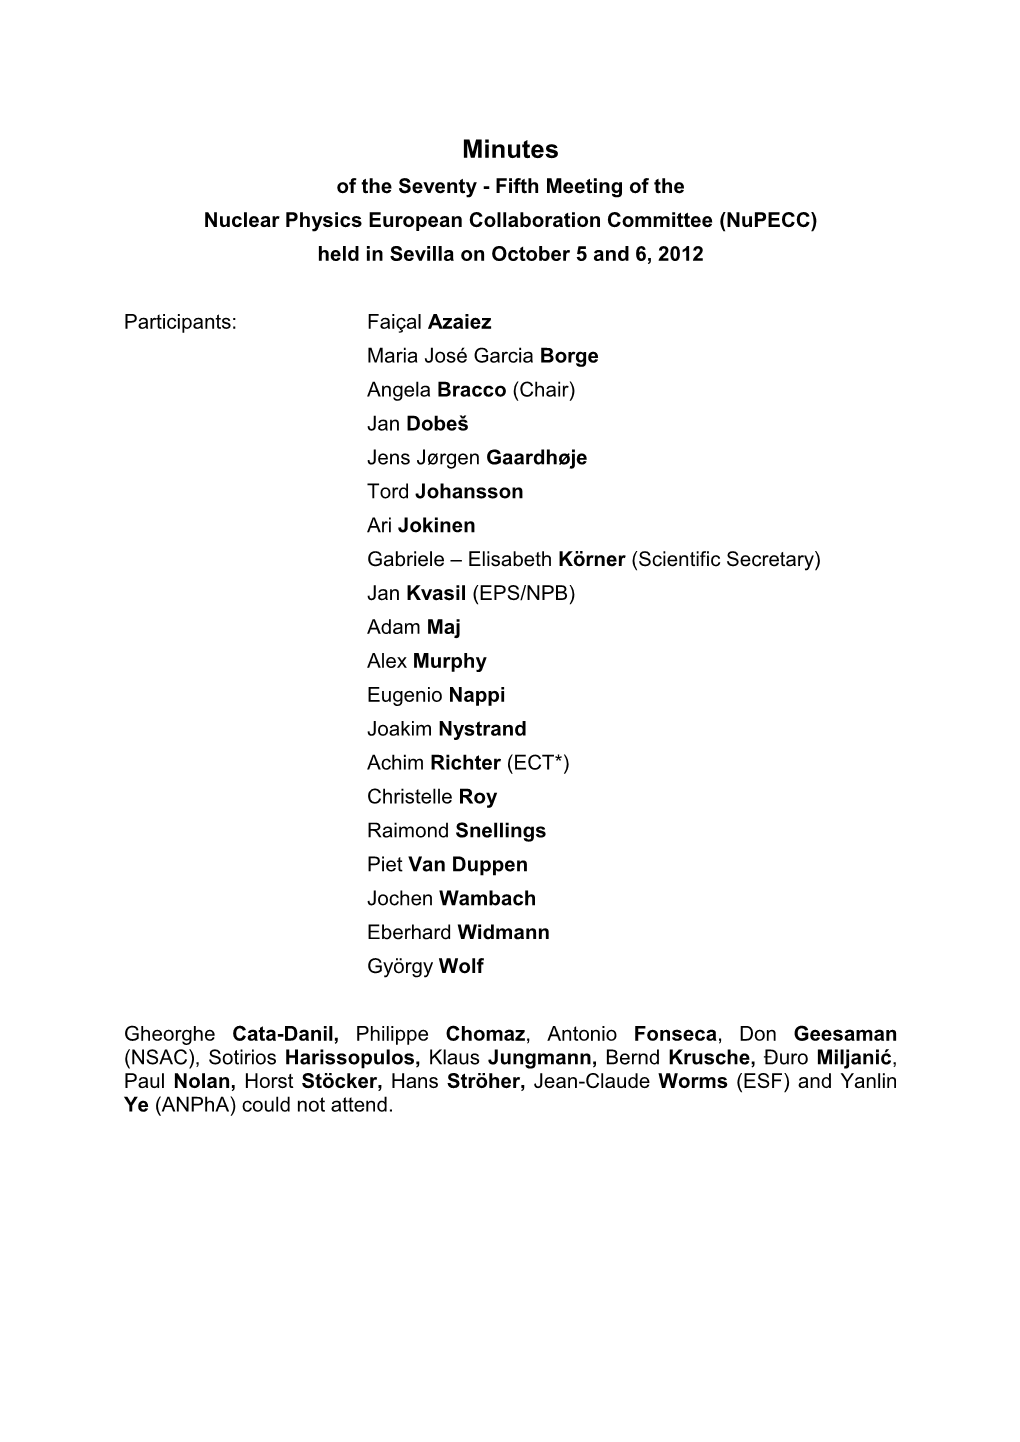 Minutes of the Seventy - Fifth Meeting of the Nuclear Physics European Collaboration Committee (Nupecc) Held in Sevilla on October 5 and 6, 2012